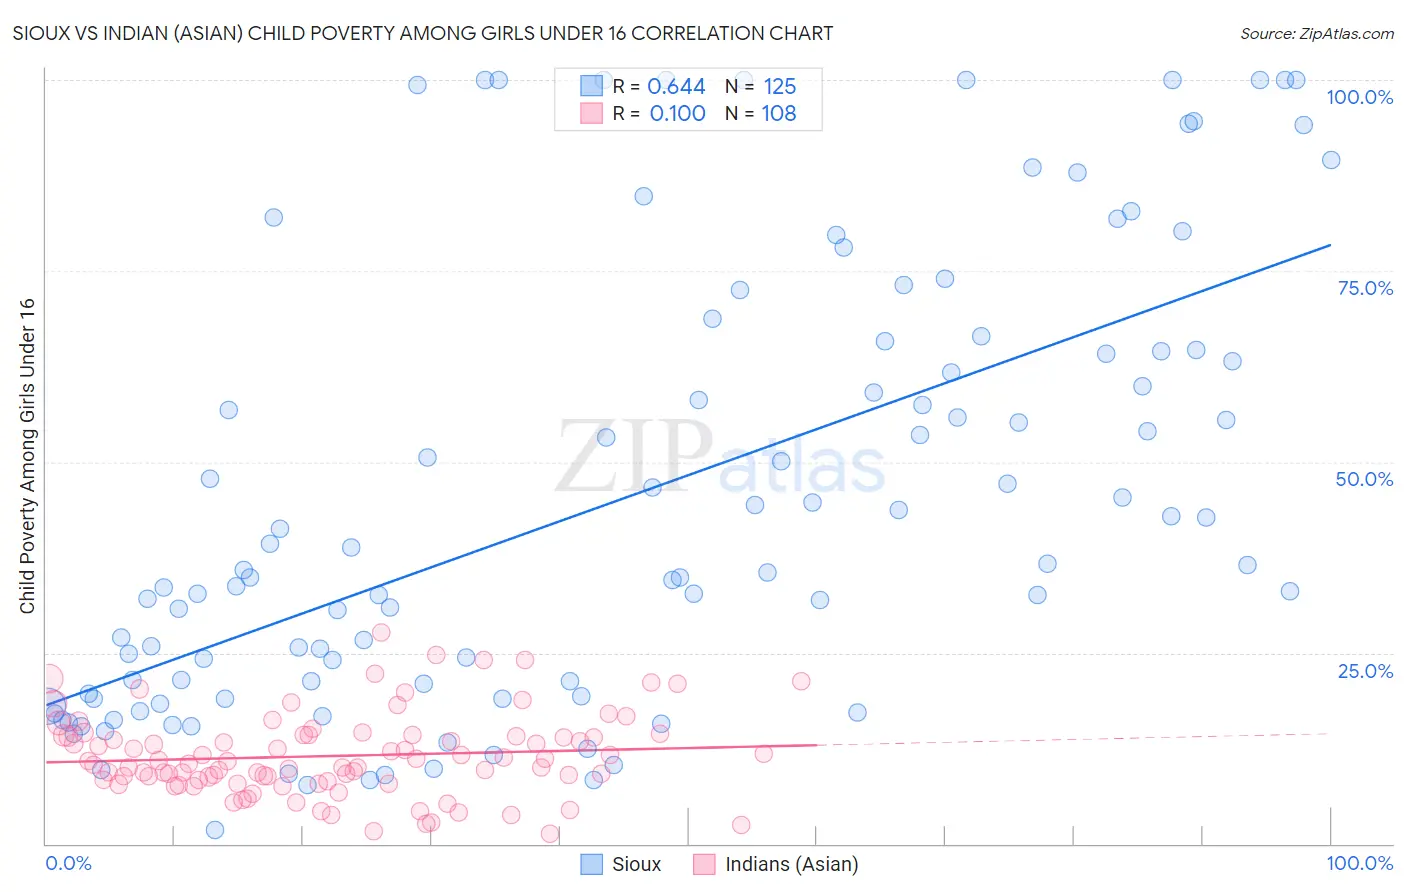 Sioux vs Indian (Asian) Child Poverty Among Girls Under 16